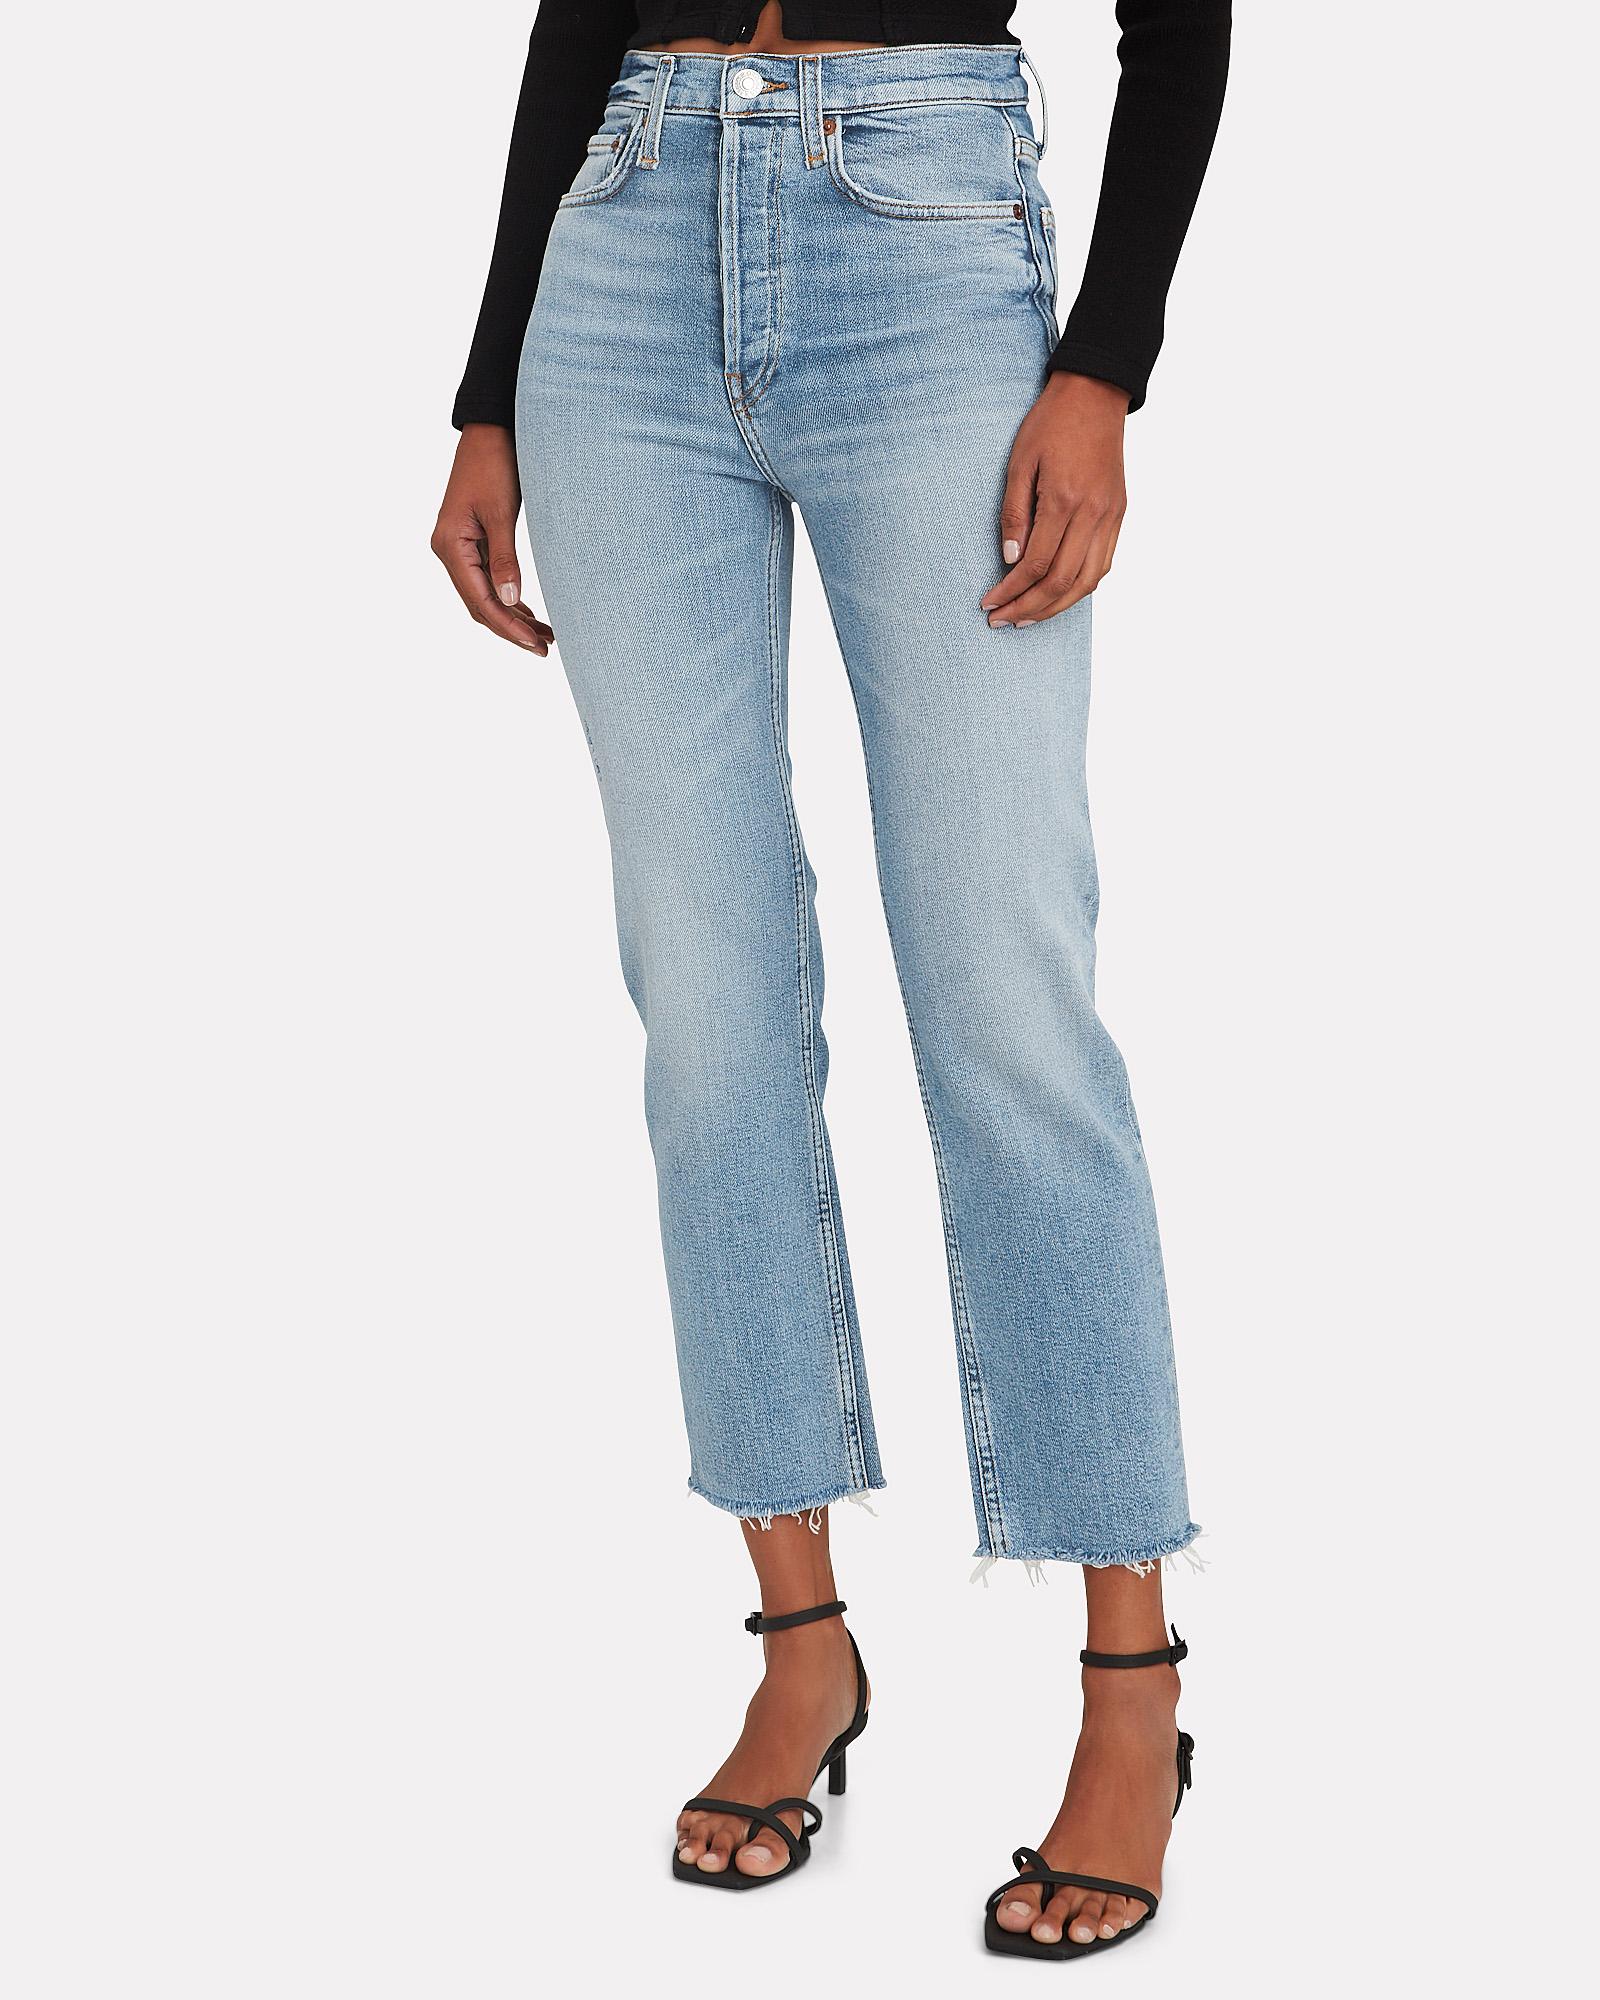 RE/DONE Denim 70s High-rise Stove Pipe Jeans in Light Stone (Blue) - Lyst